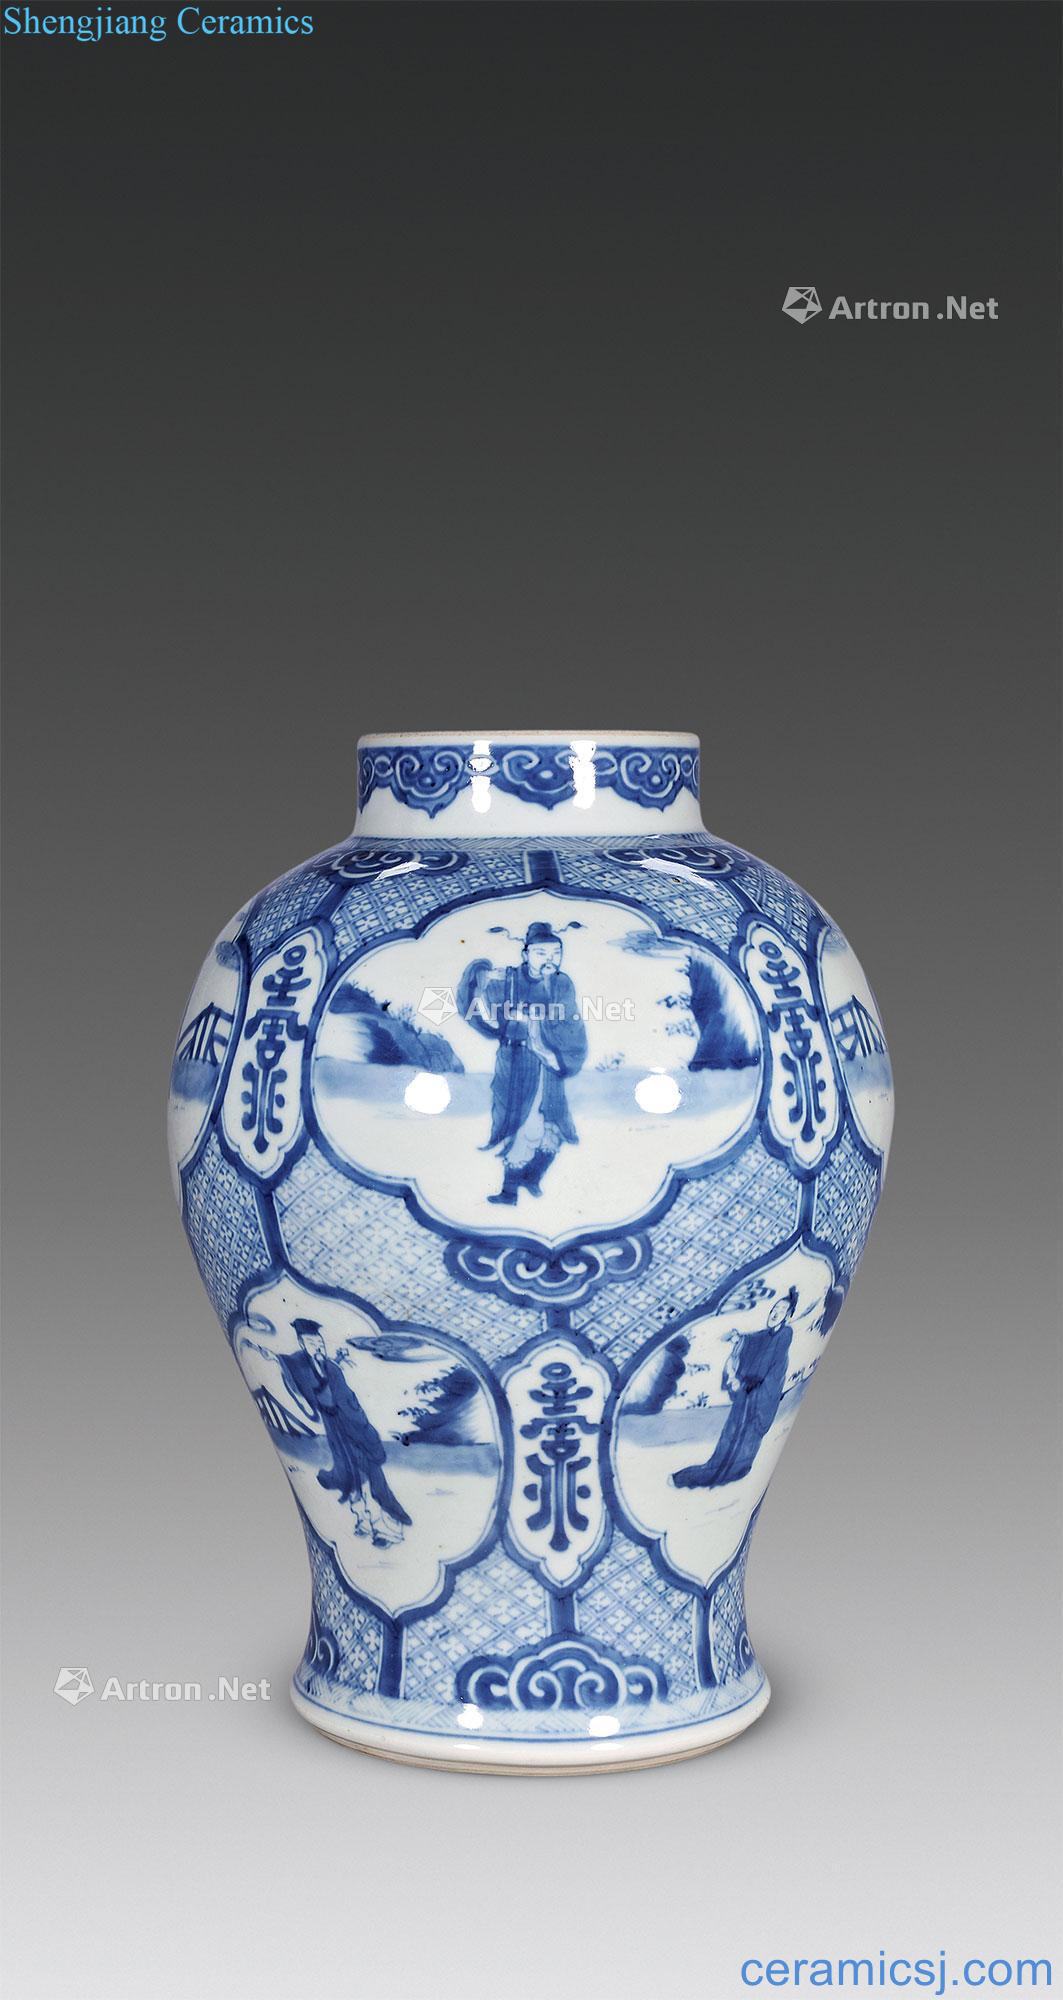 The qing emperor kangxi in blue and white brocade medallion figure can of the eight immortals